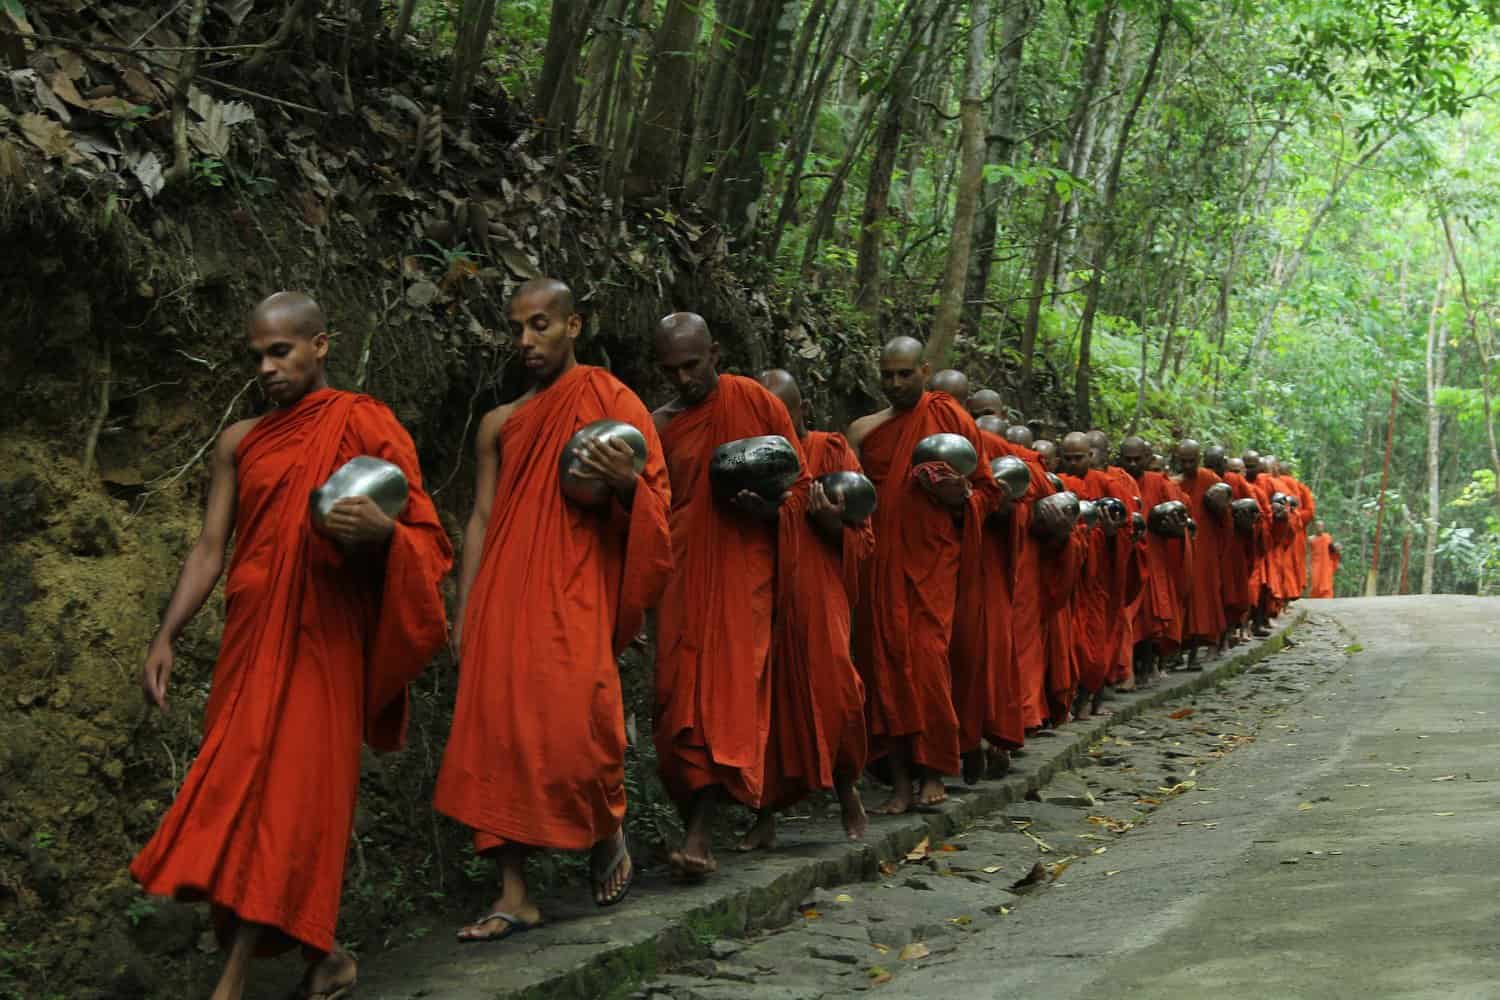 monks fall inline on sidewalk. sages of sivarna theory.